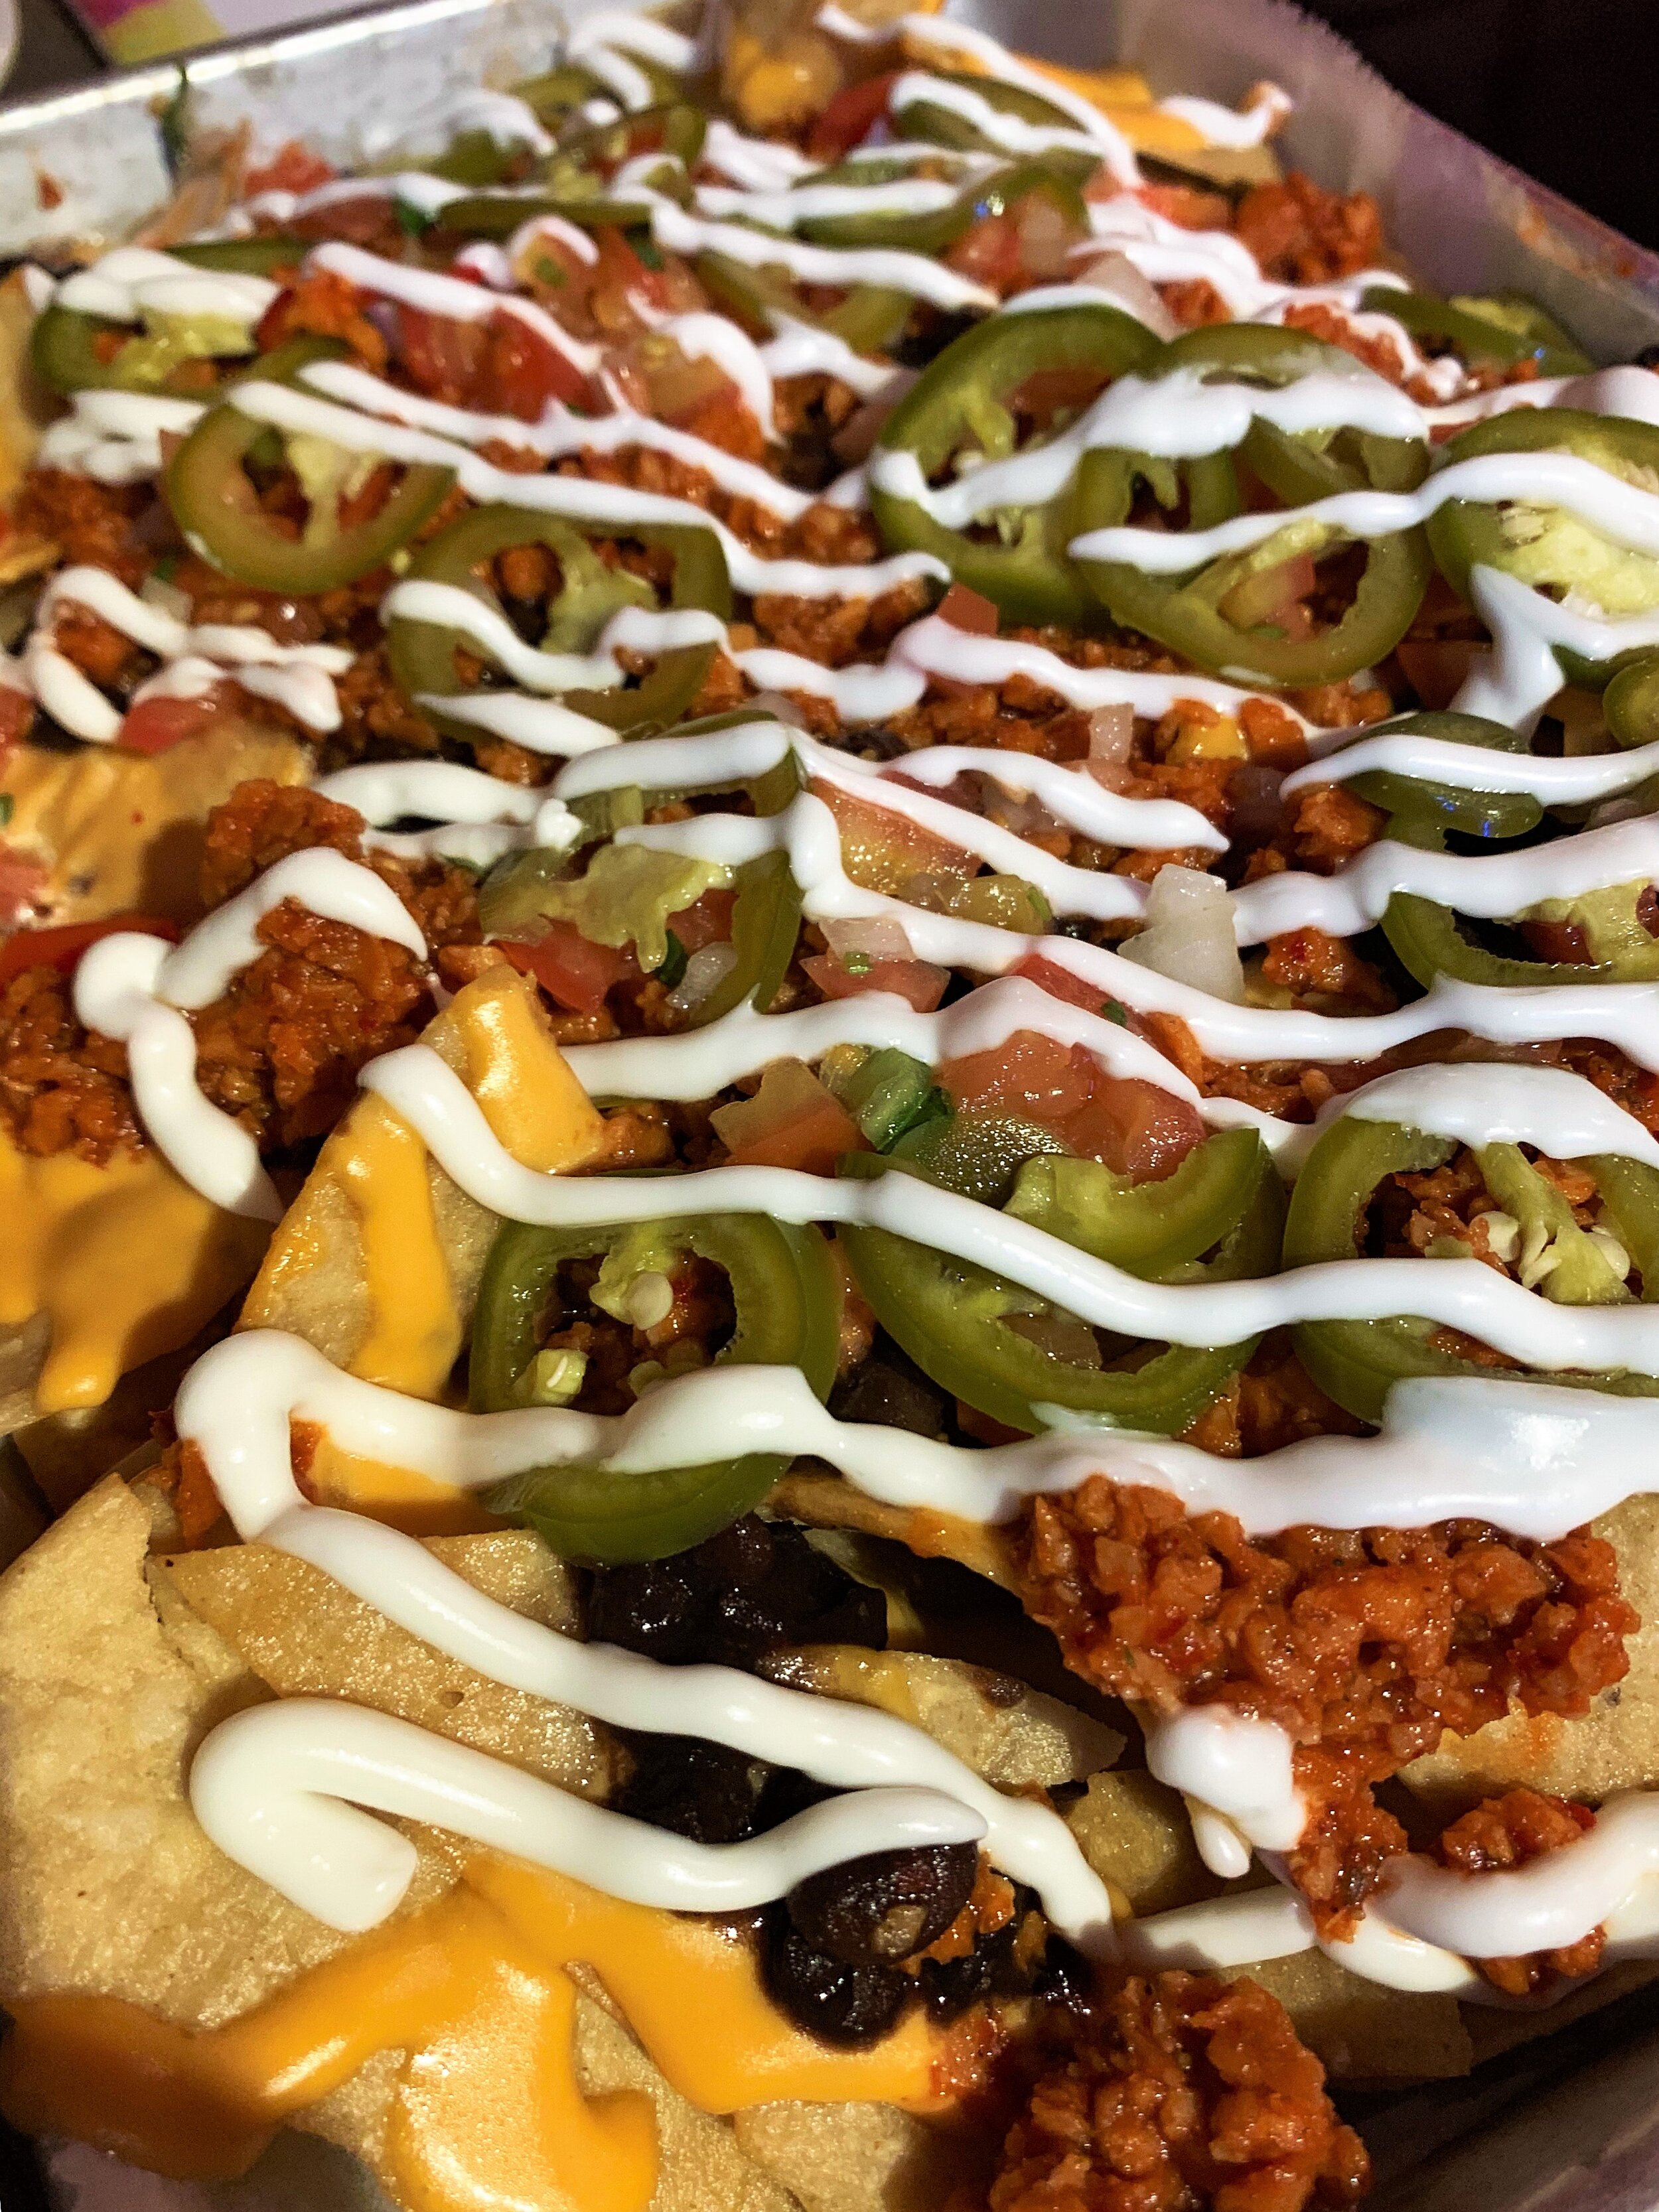 Nacho chips topped with vegan cheese and sour cream, soy chorizo, black beans, and jalapeños.